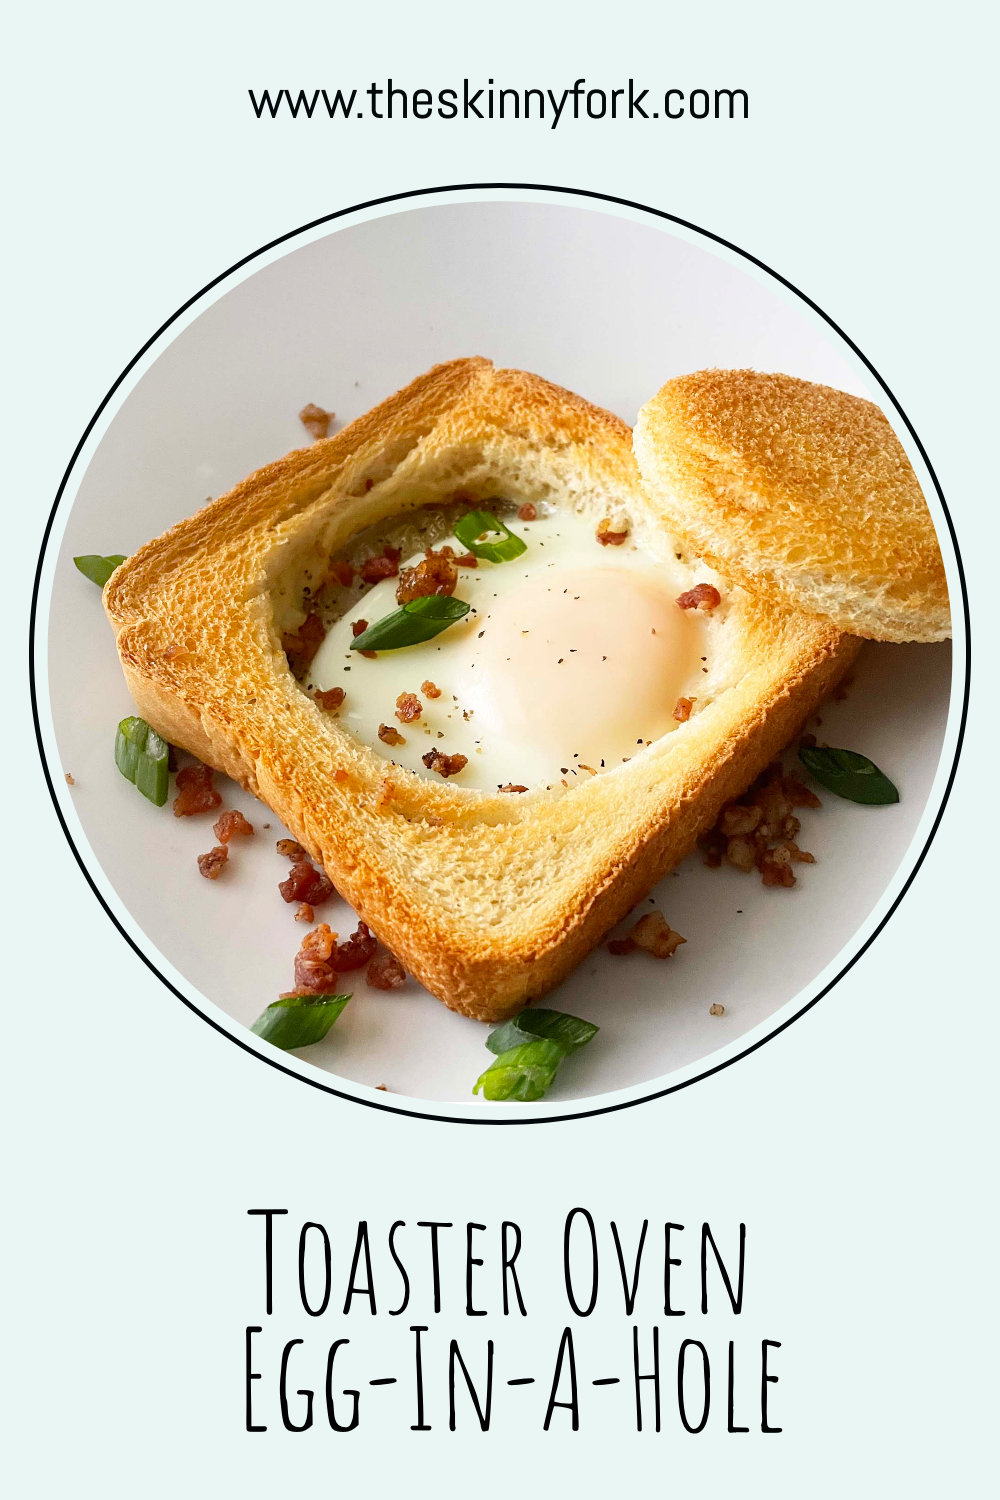 https://images.squarespace-cdn.com/content/v1/5113fcede4b099bd04eebc8d/3ac40fc3-7a35-4353-8760-4aa96acc7414/toaster-oven-egg-in-a-hole-pin.png